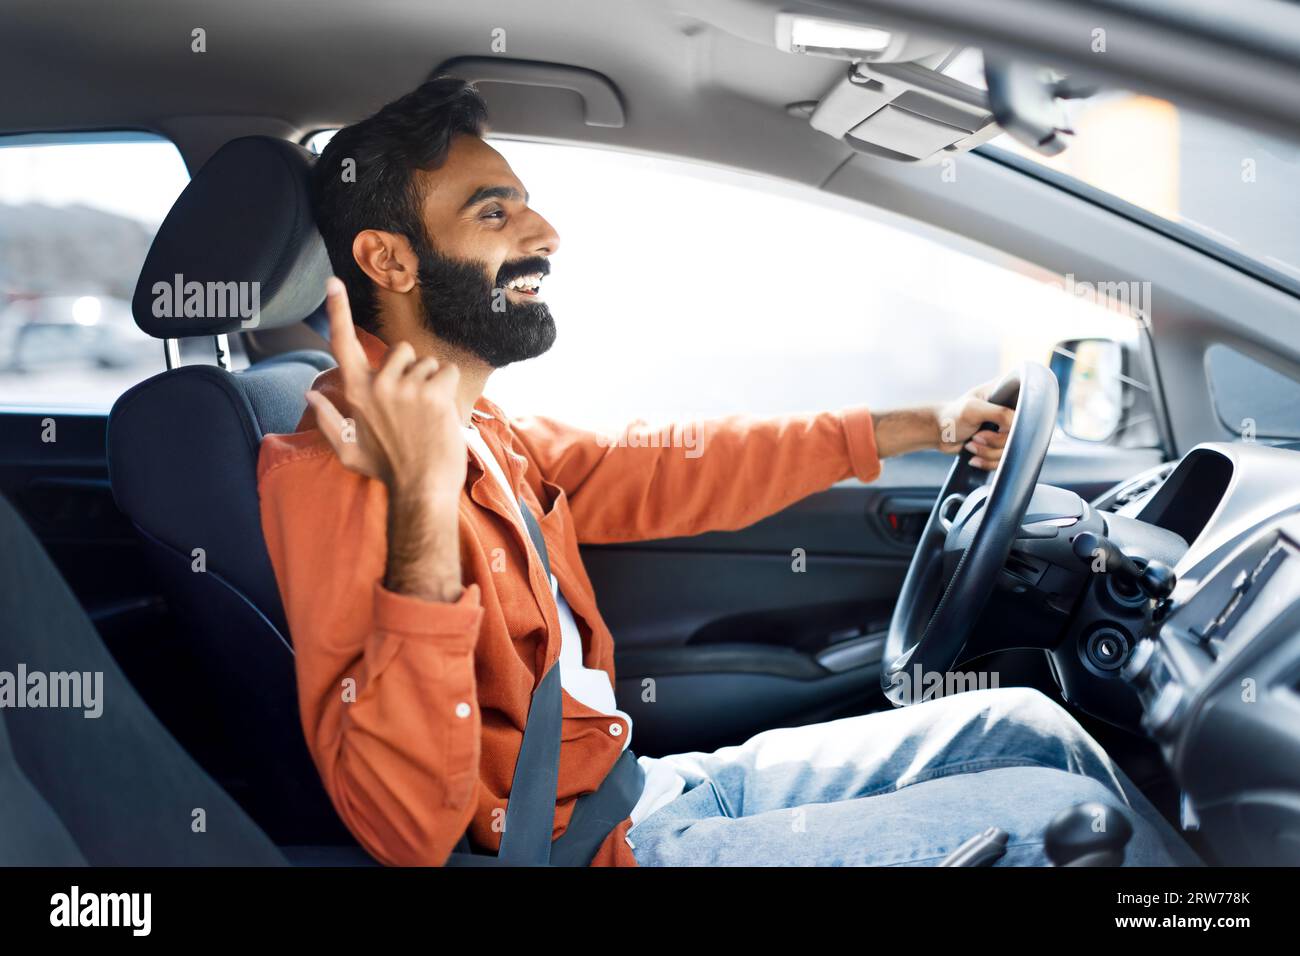 Arab Man Riding Automobile Vehicle, Driving Sitting In Driver's Seat Stock Photo